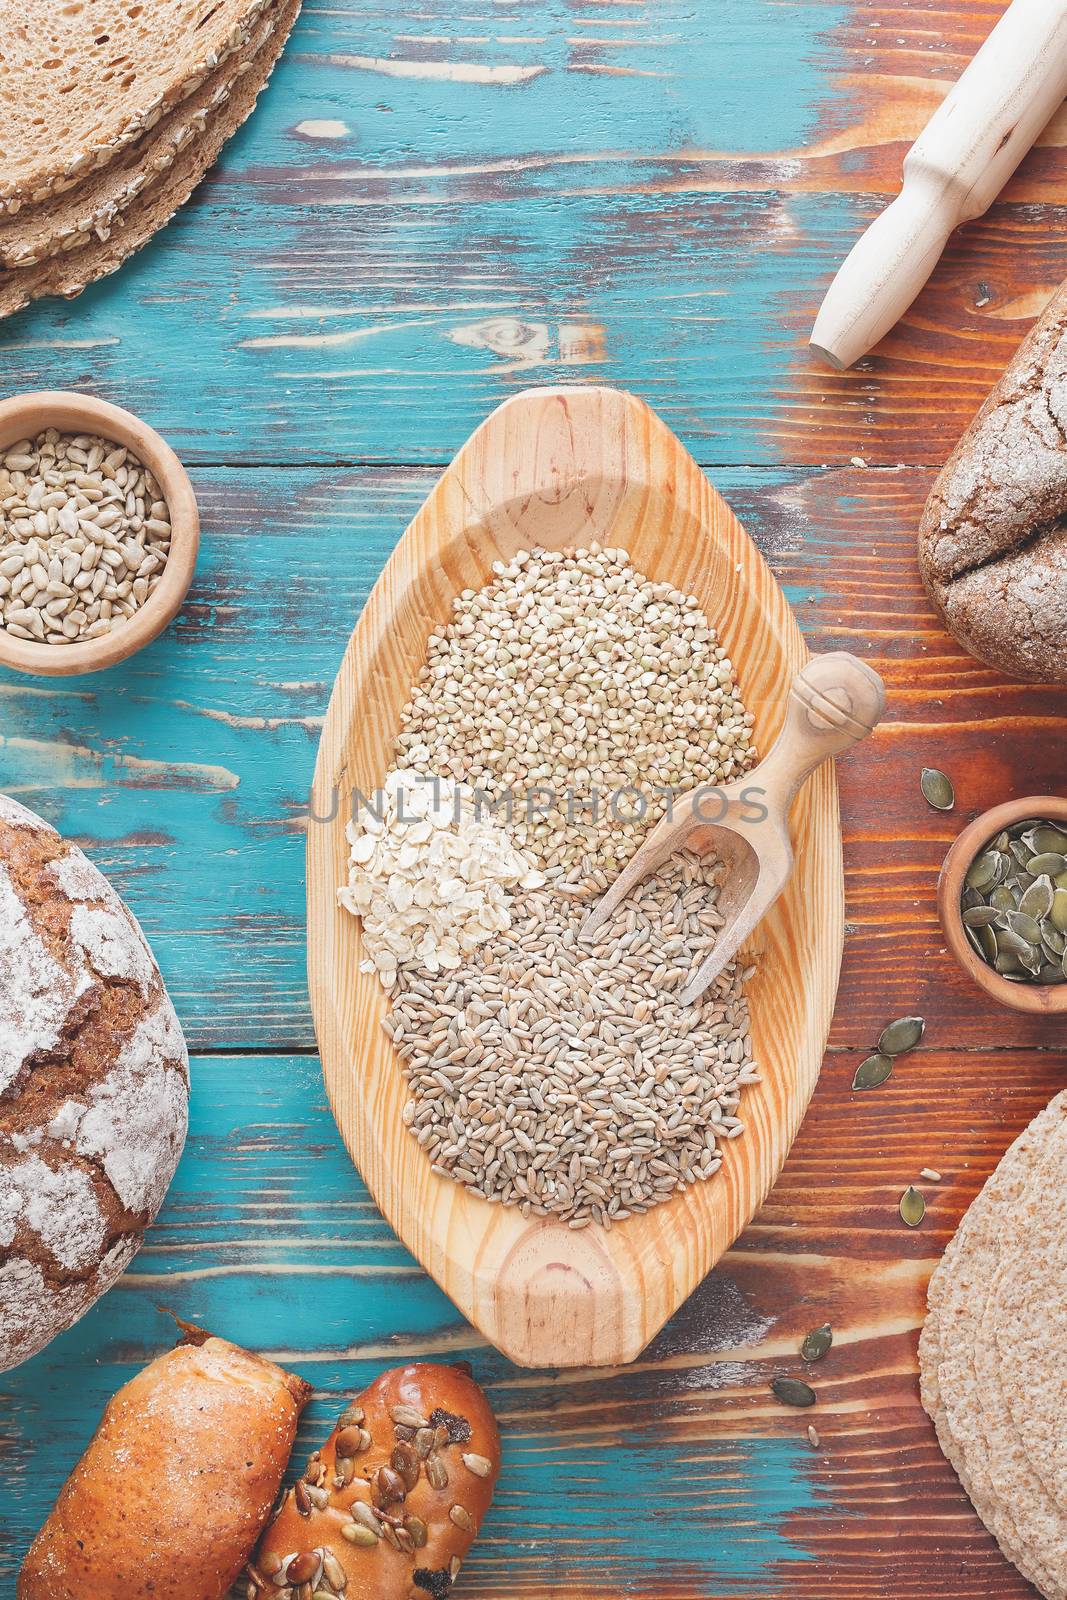 An assortment of whole grains and bread by Slast20